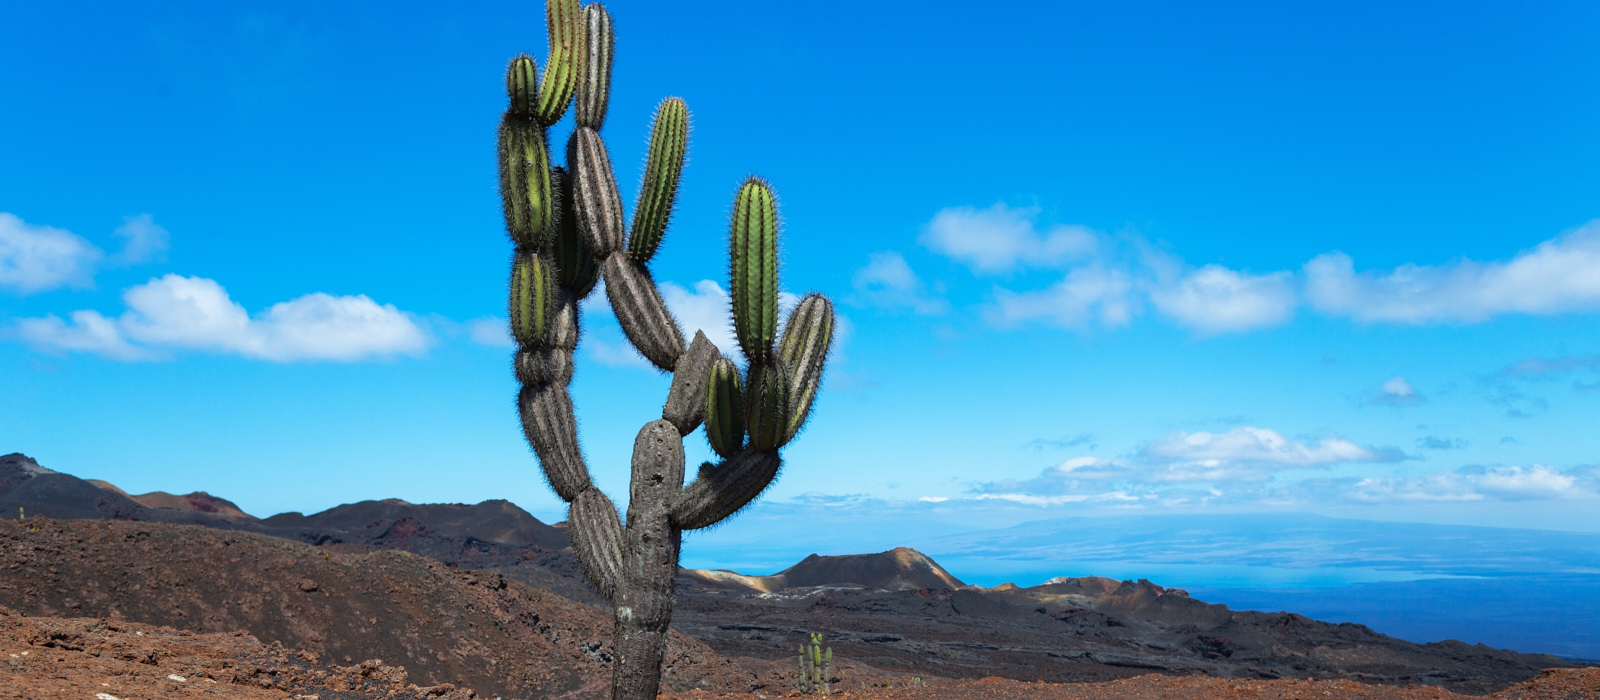 8 DAY LUXURY GALAPAGOS ESCAPE